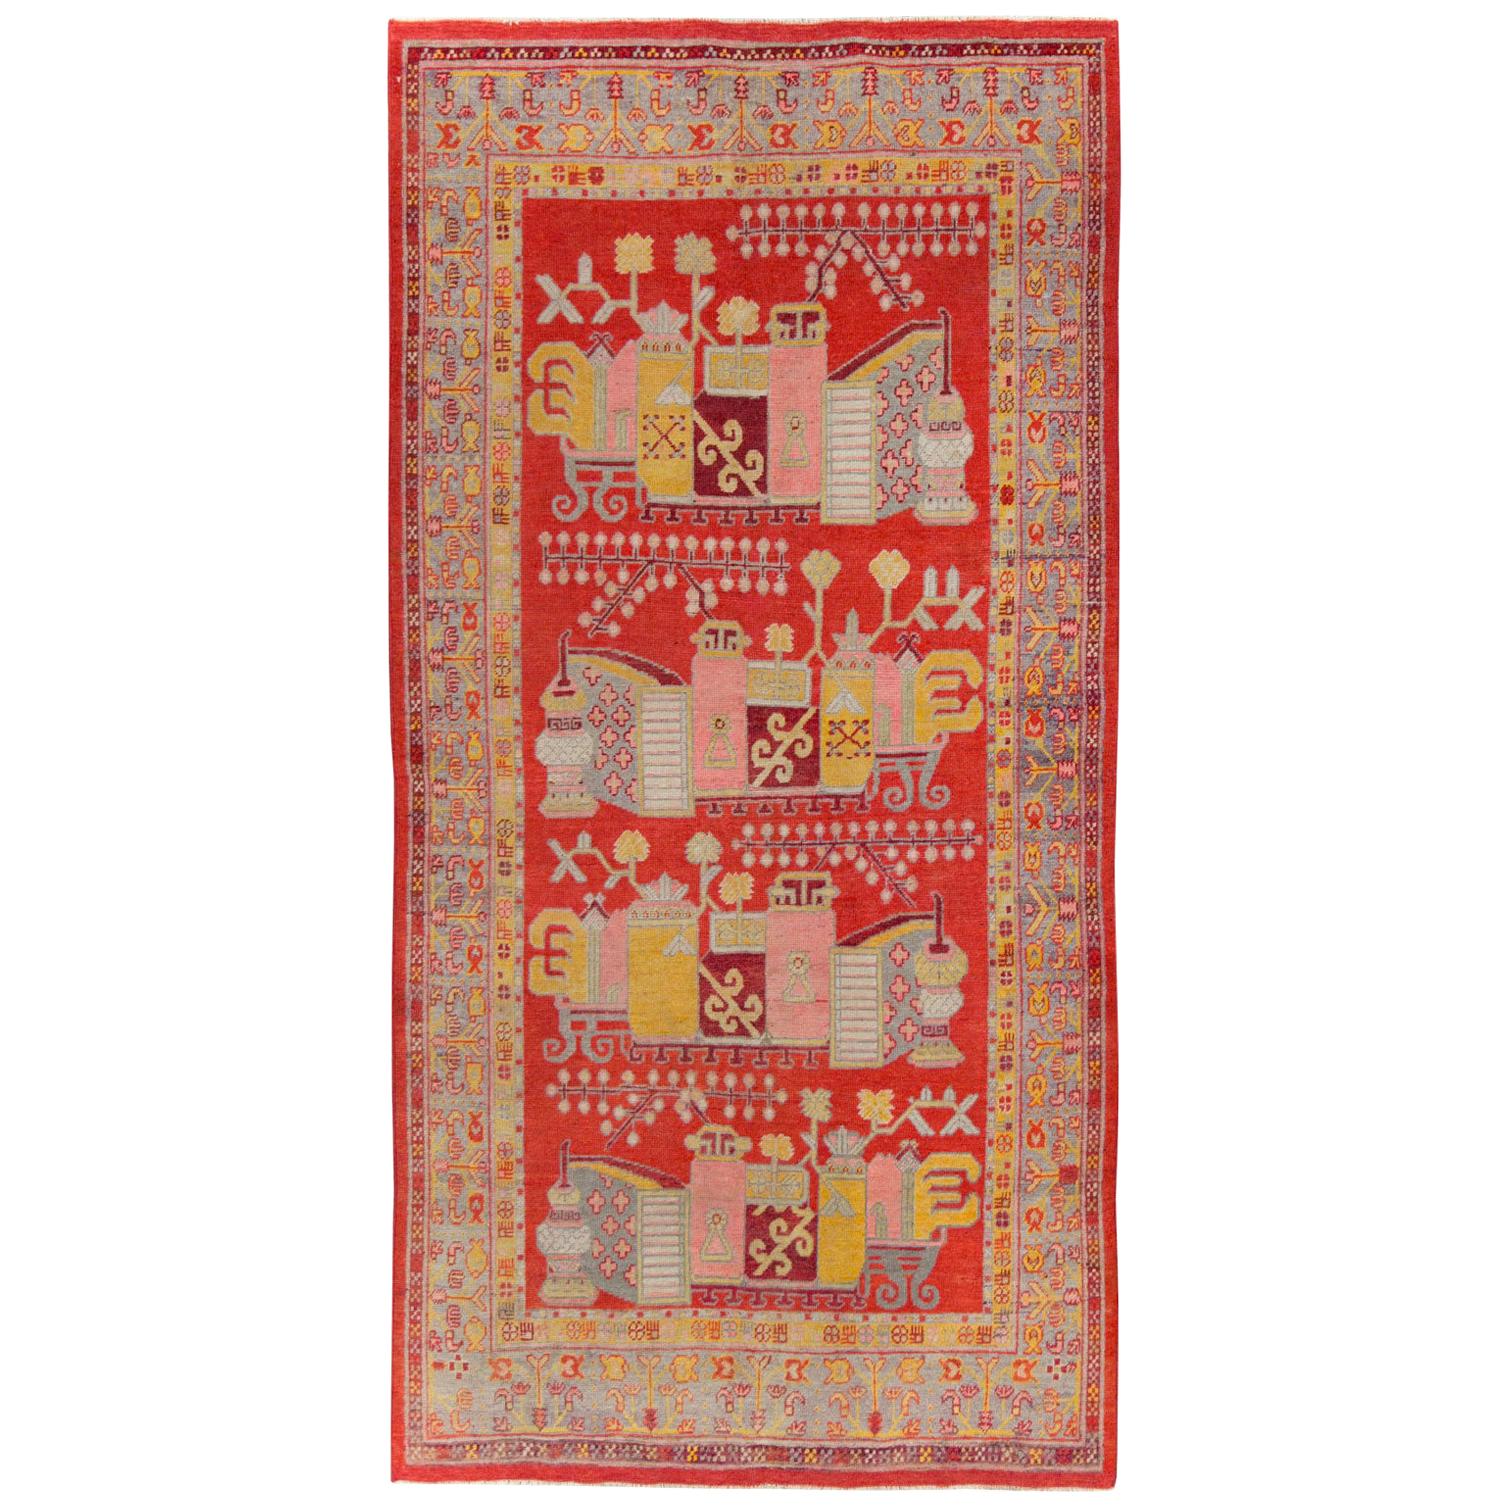 Early 20th Century East Turkestan Pictorial Vase Khotan Small Gallery Rug in Red For Sale